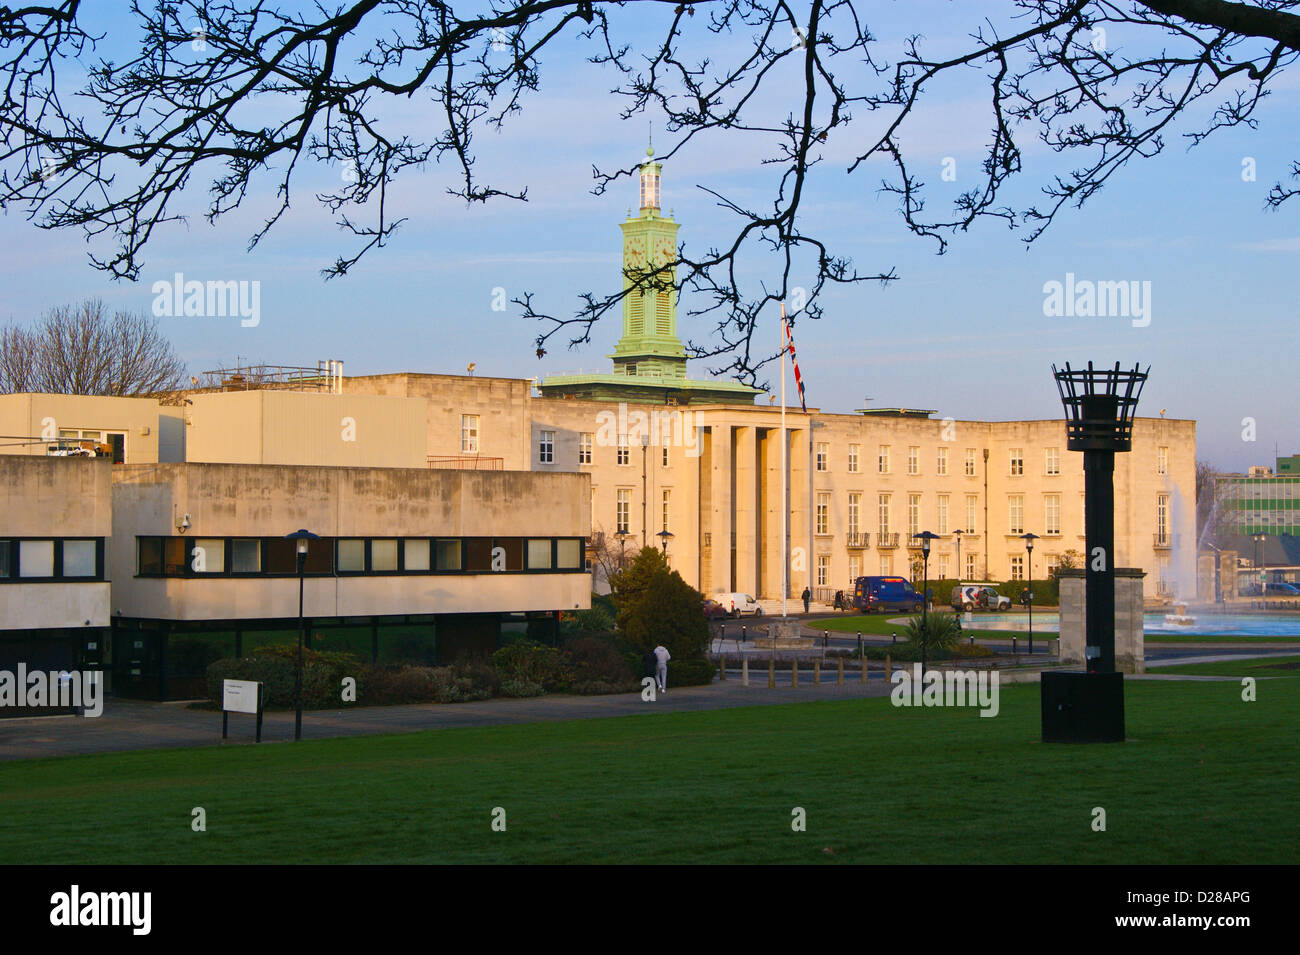 Walthamstow Town Hall, Art Deco 1937-42 by P.D. Hepworth, Forest Road, Waltham Forest, London, England, at sunset Stock Photo